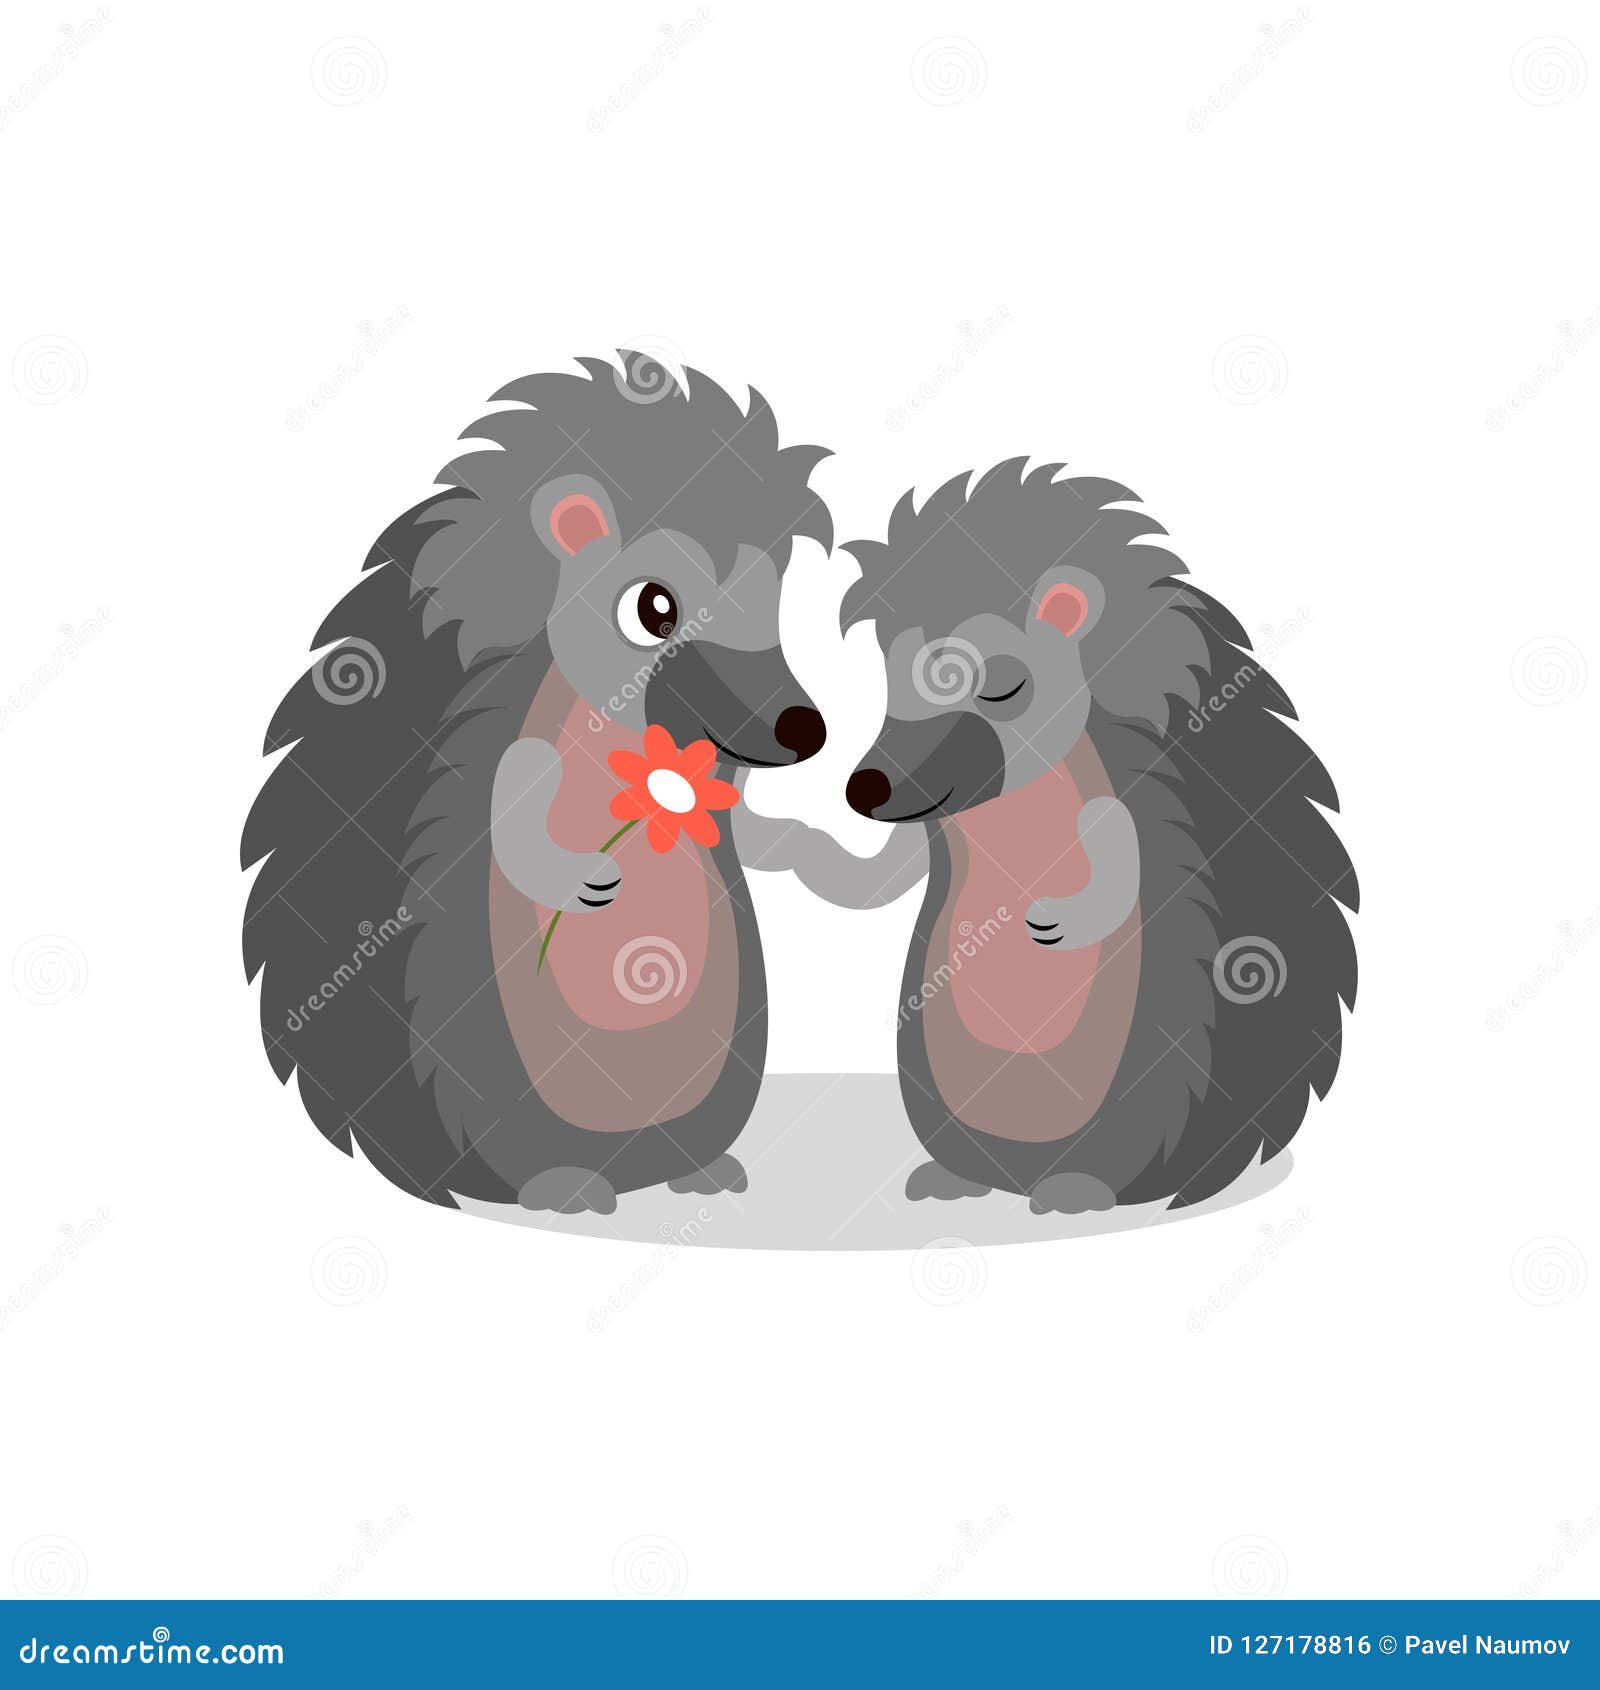 Couple of Hedgehogs, Hedgehog Giving a Flower To Another, Cute Animals Cartoon  Characters Vector Illustration on a White Stock Vector - Illustration of  character, beautiful: 127178816